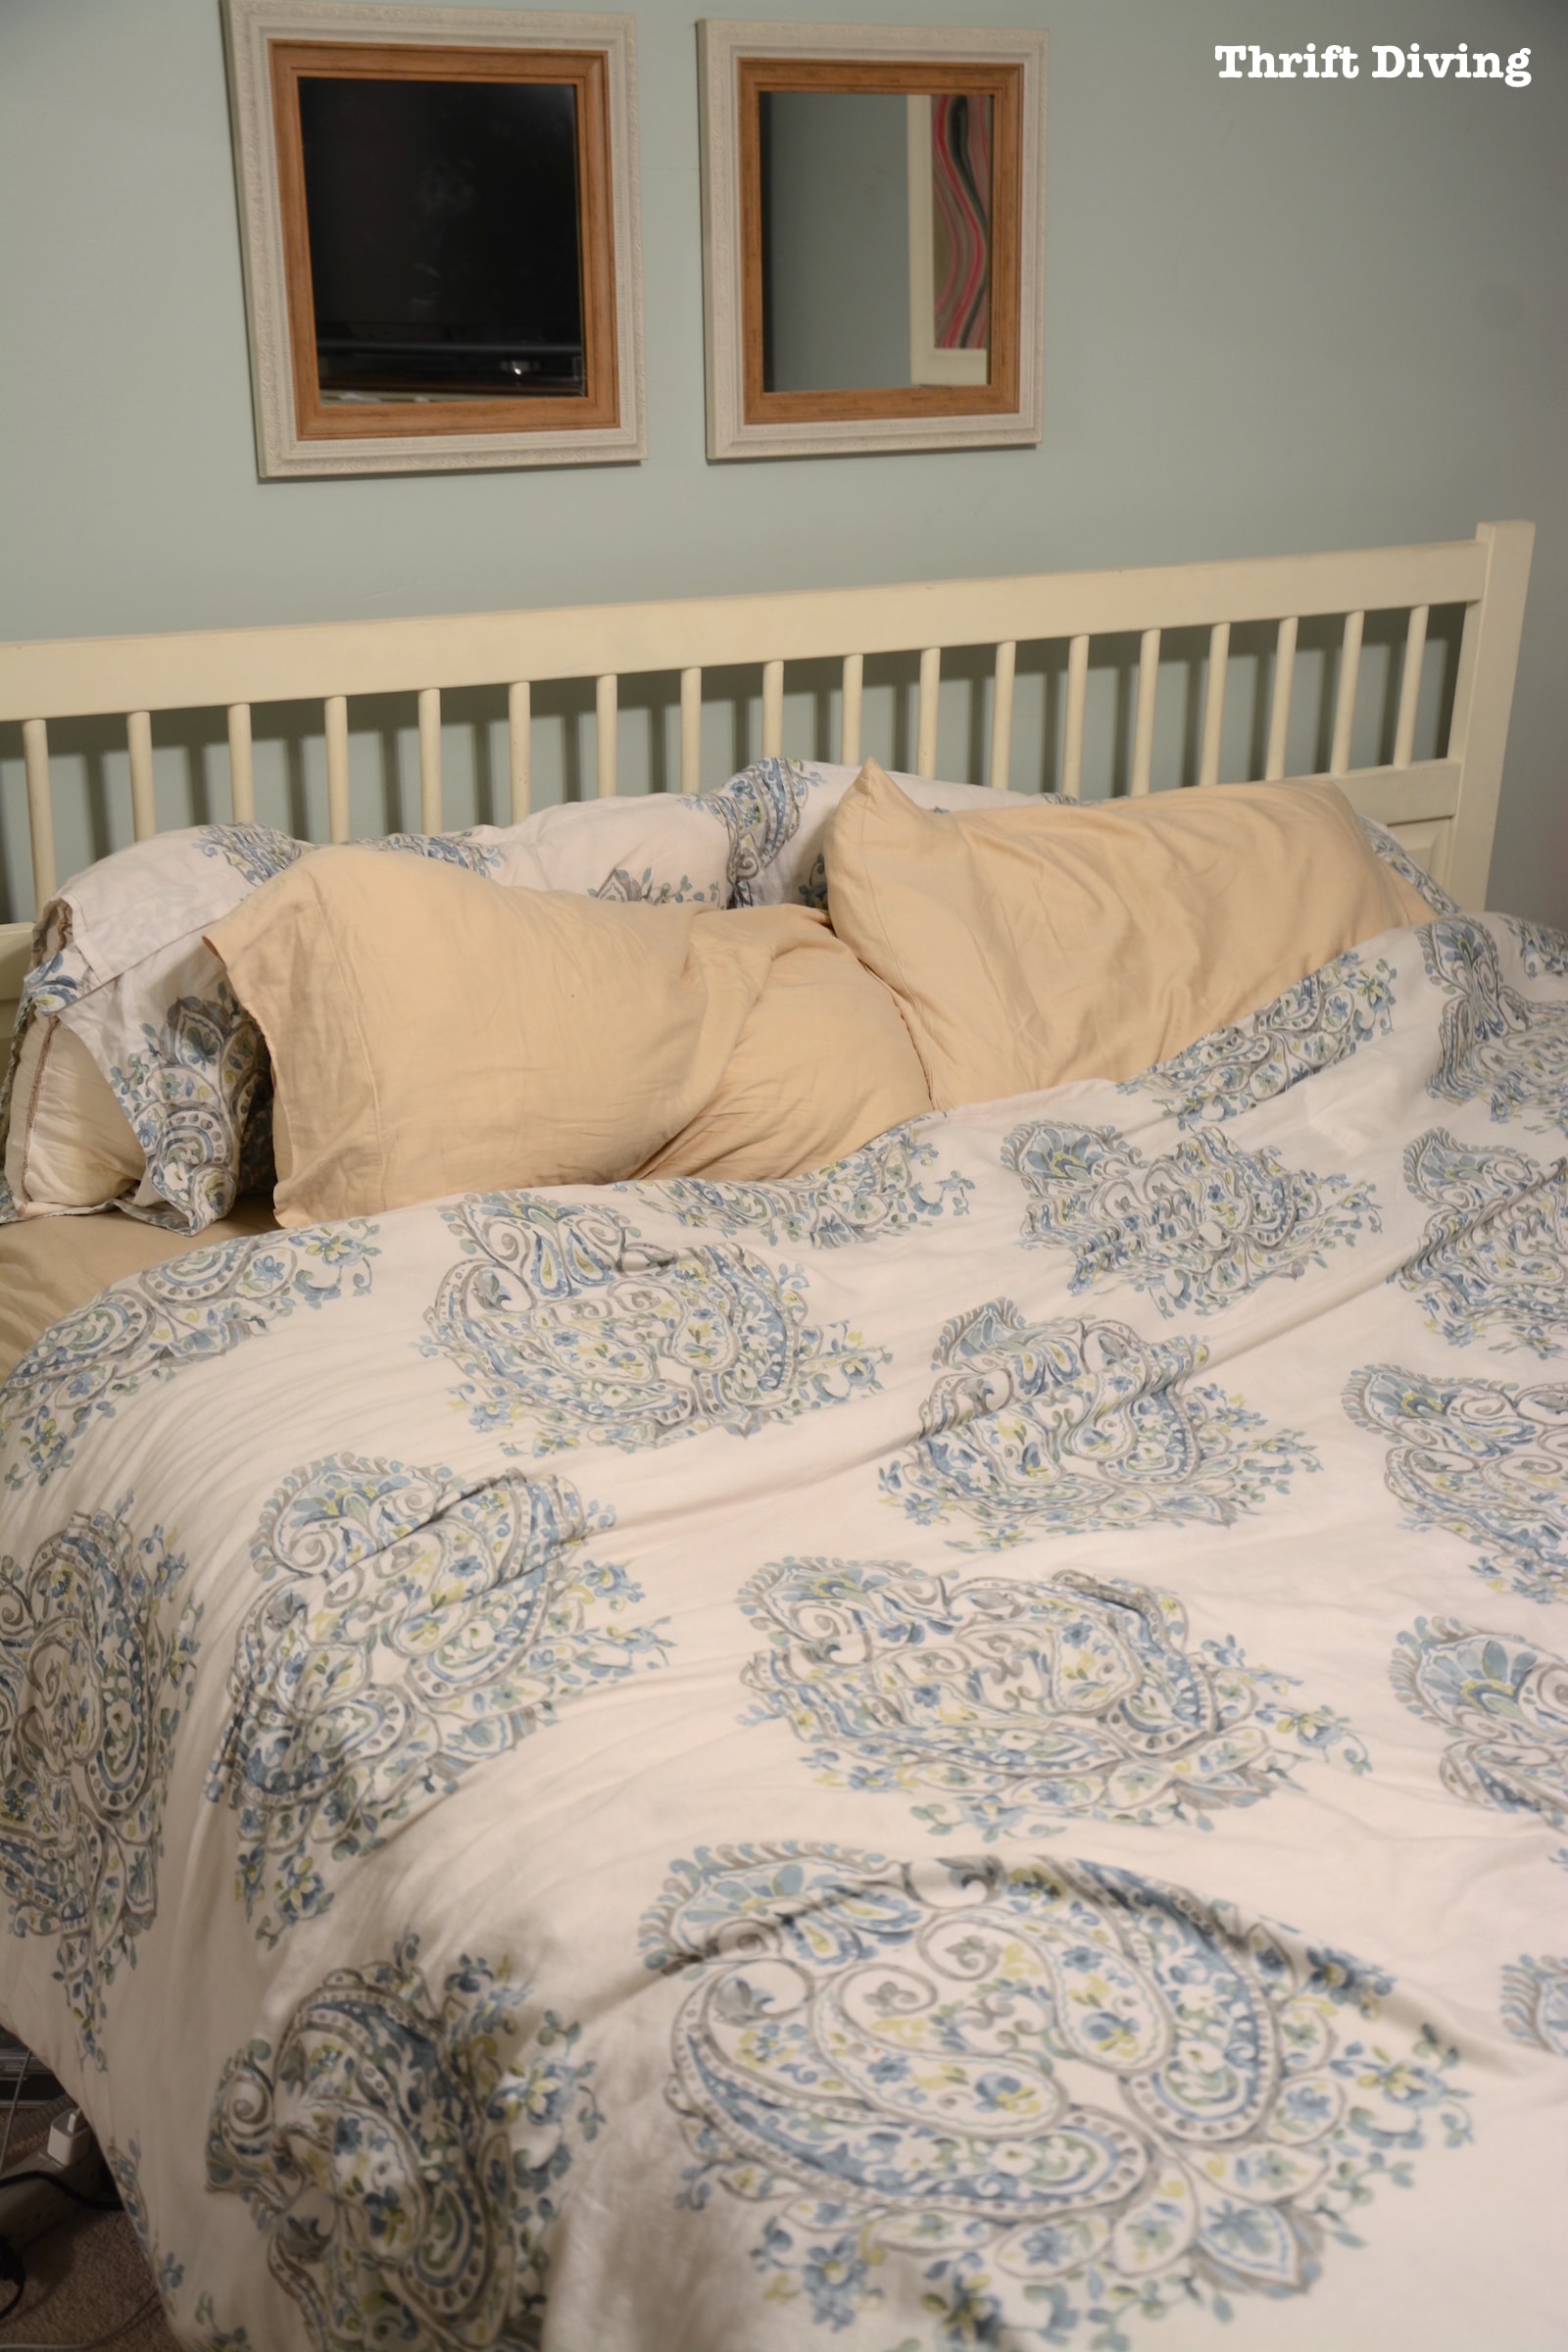 Are Brentwood pillows worth it? A Brentwood Home pillows review. - Thrift Diving